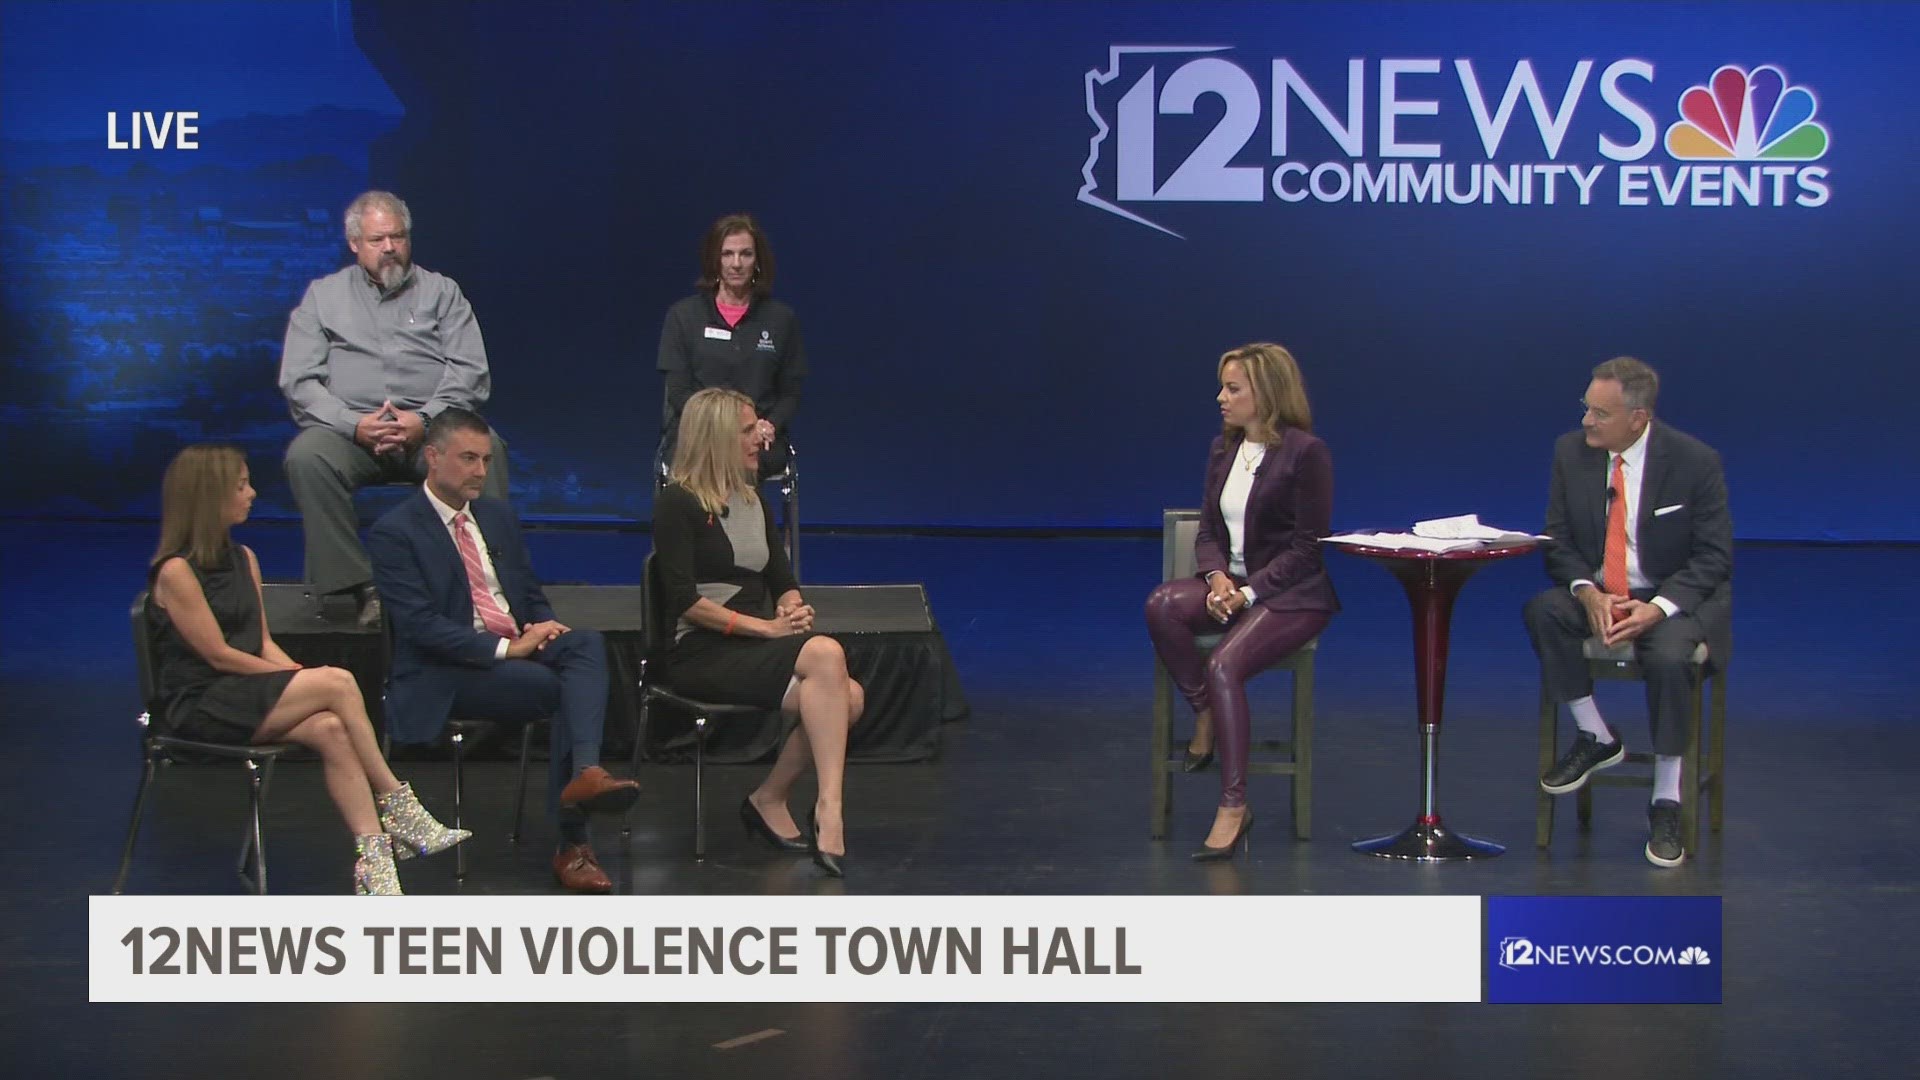 At the 12News Town Hall on Teen Violence in the East Valley, 12News talks with experts about how parents and schools can help with the issue.